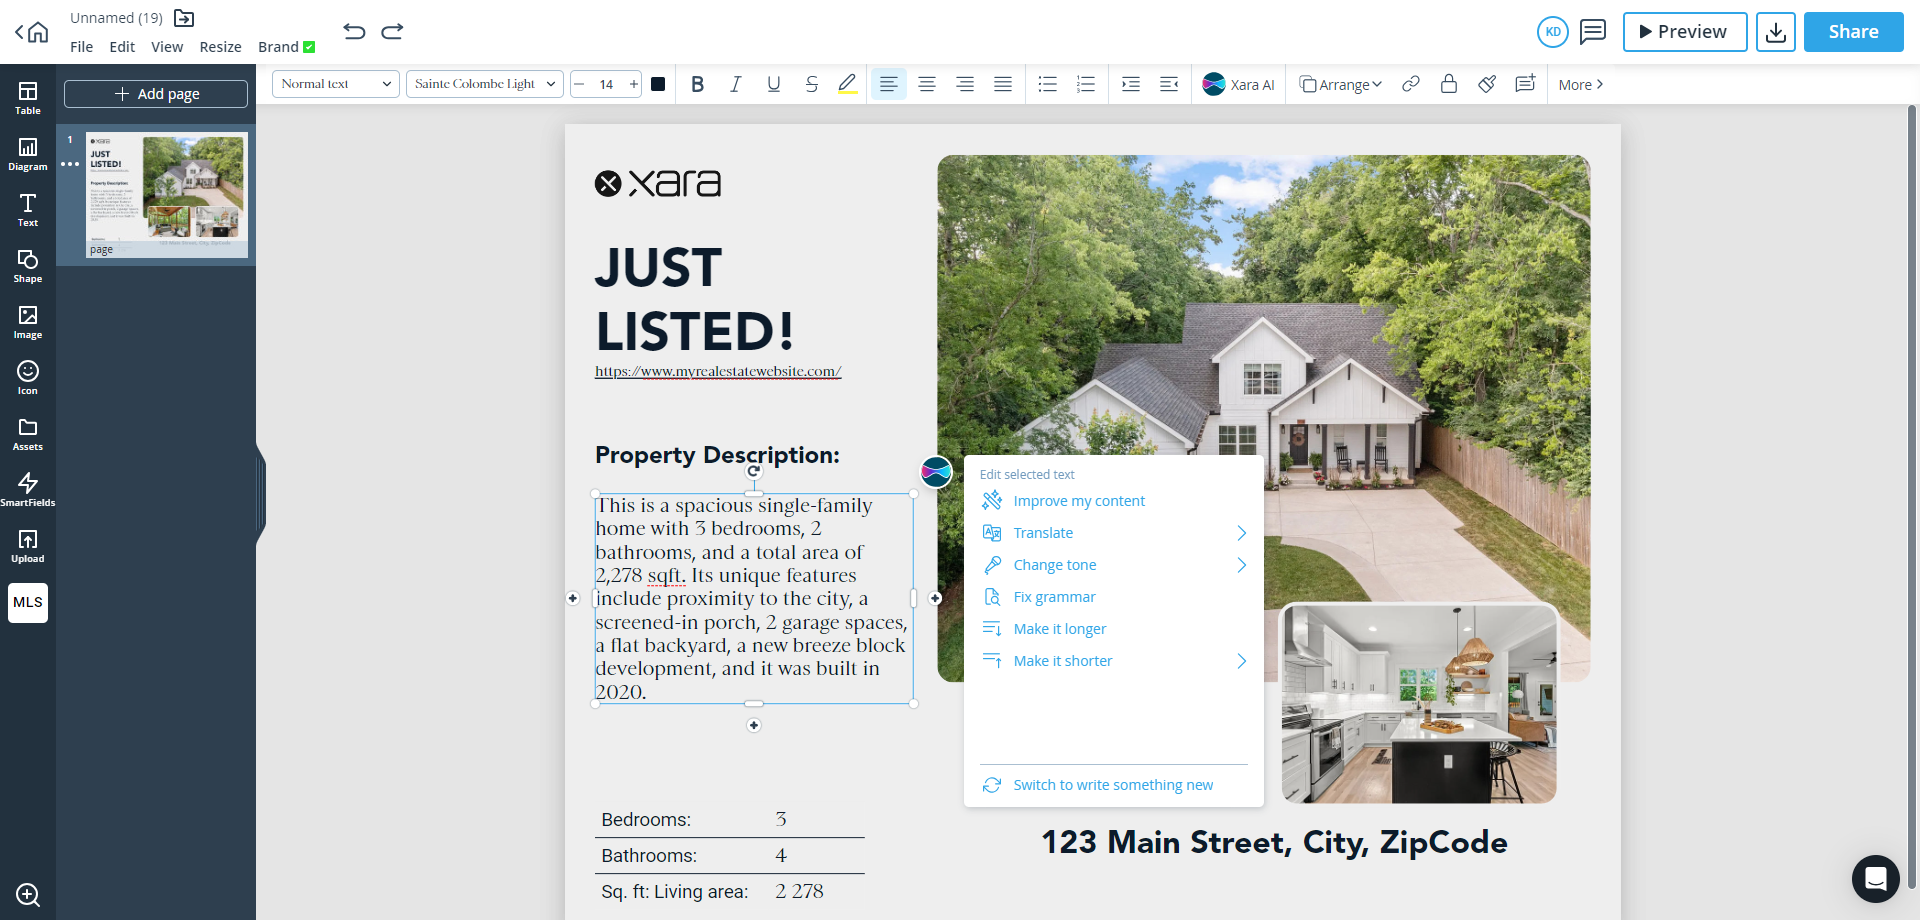 Generate Descriptions for Real Estate Listings with AI